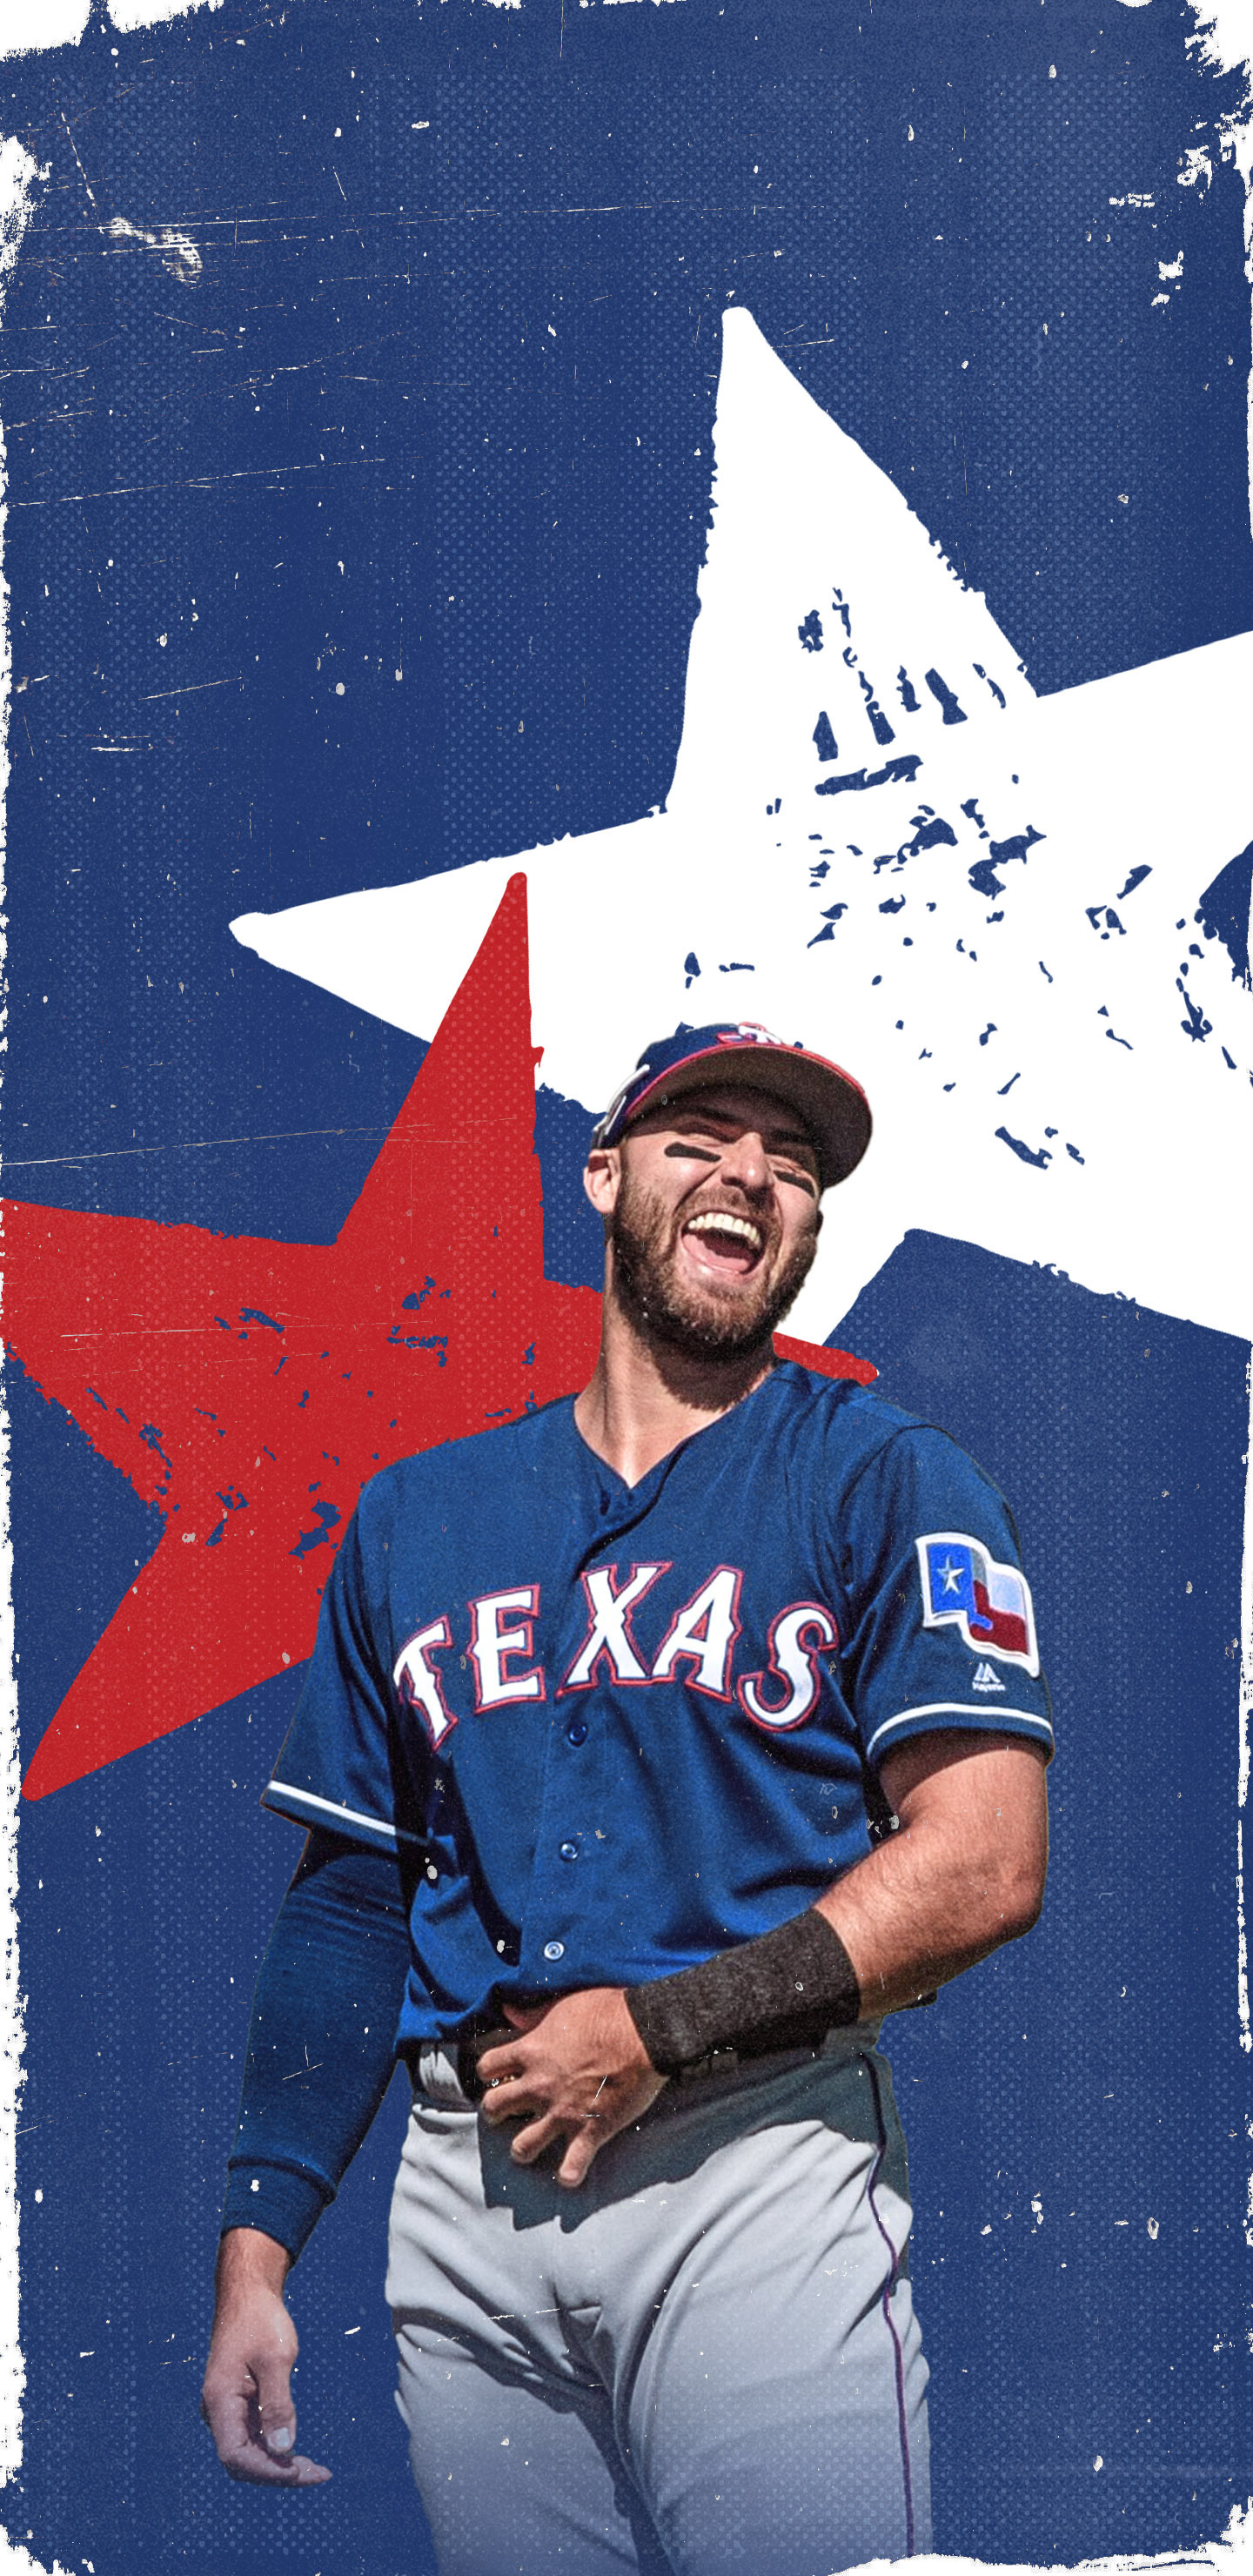 Pin by Haydentgm on jersey concepts MLB  Shirts, Texas rangers, Concert  poster design